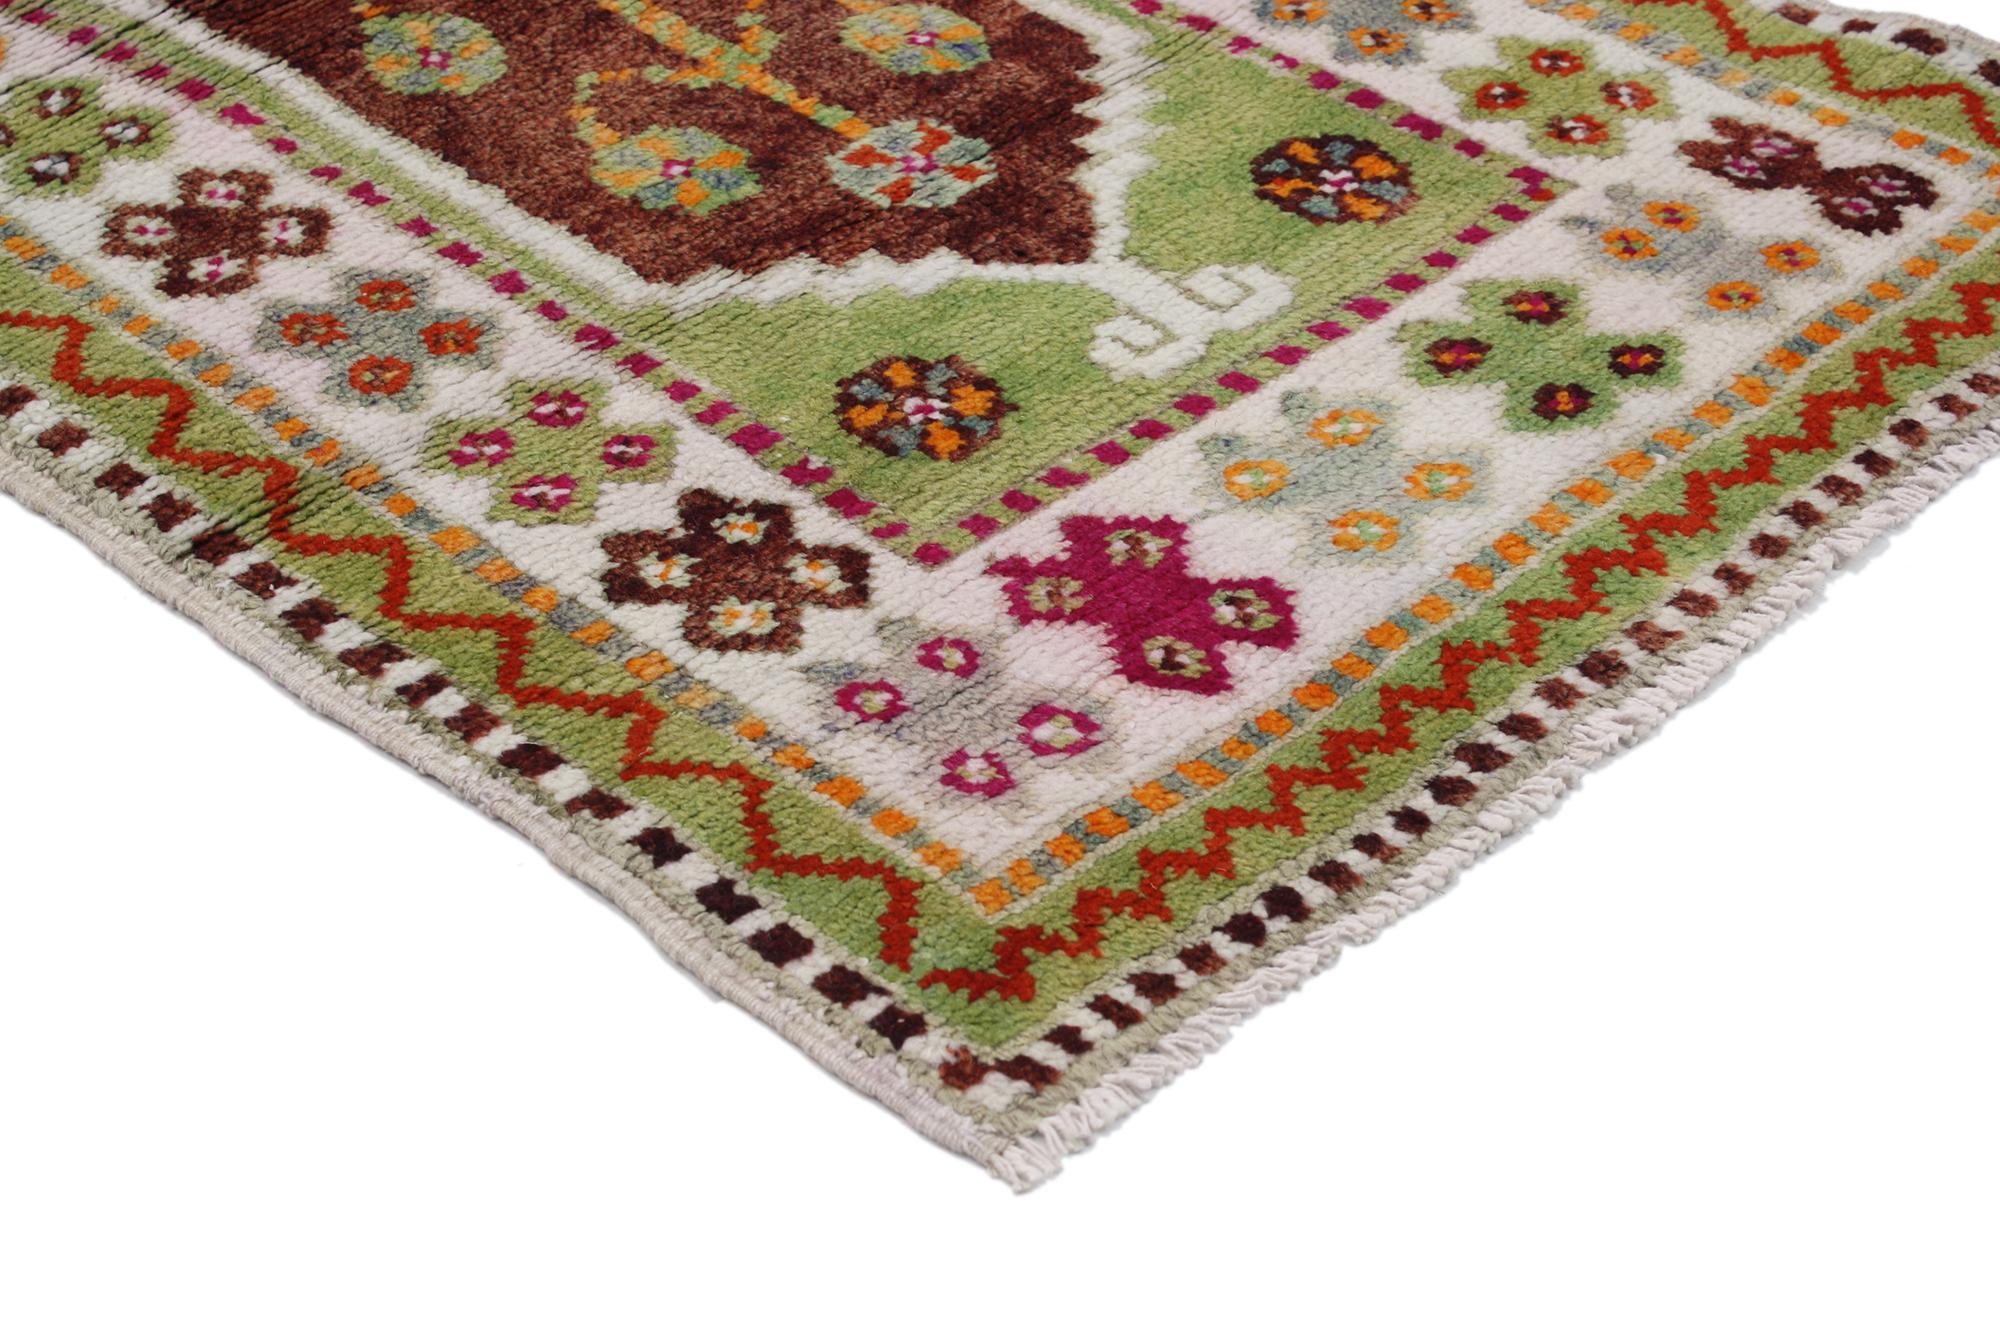 51771, Vintage Turkish Oushak Accent Rug with Color Pop, Anatolian Yuntdag Rug for Foyer, Kitchen, Bathroom or Entry Rug, 02'02 x 04'03. Providing elements of wanderlust and functional versatility, this boho chic vintage Turkish Oushak Yuntdag rug